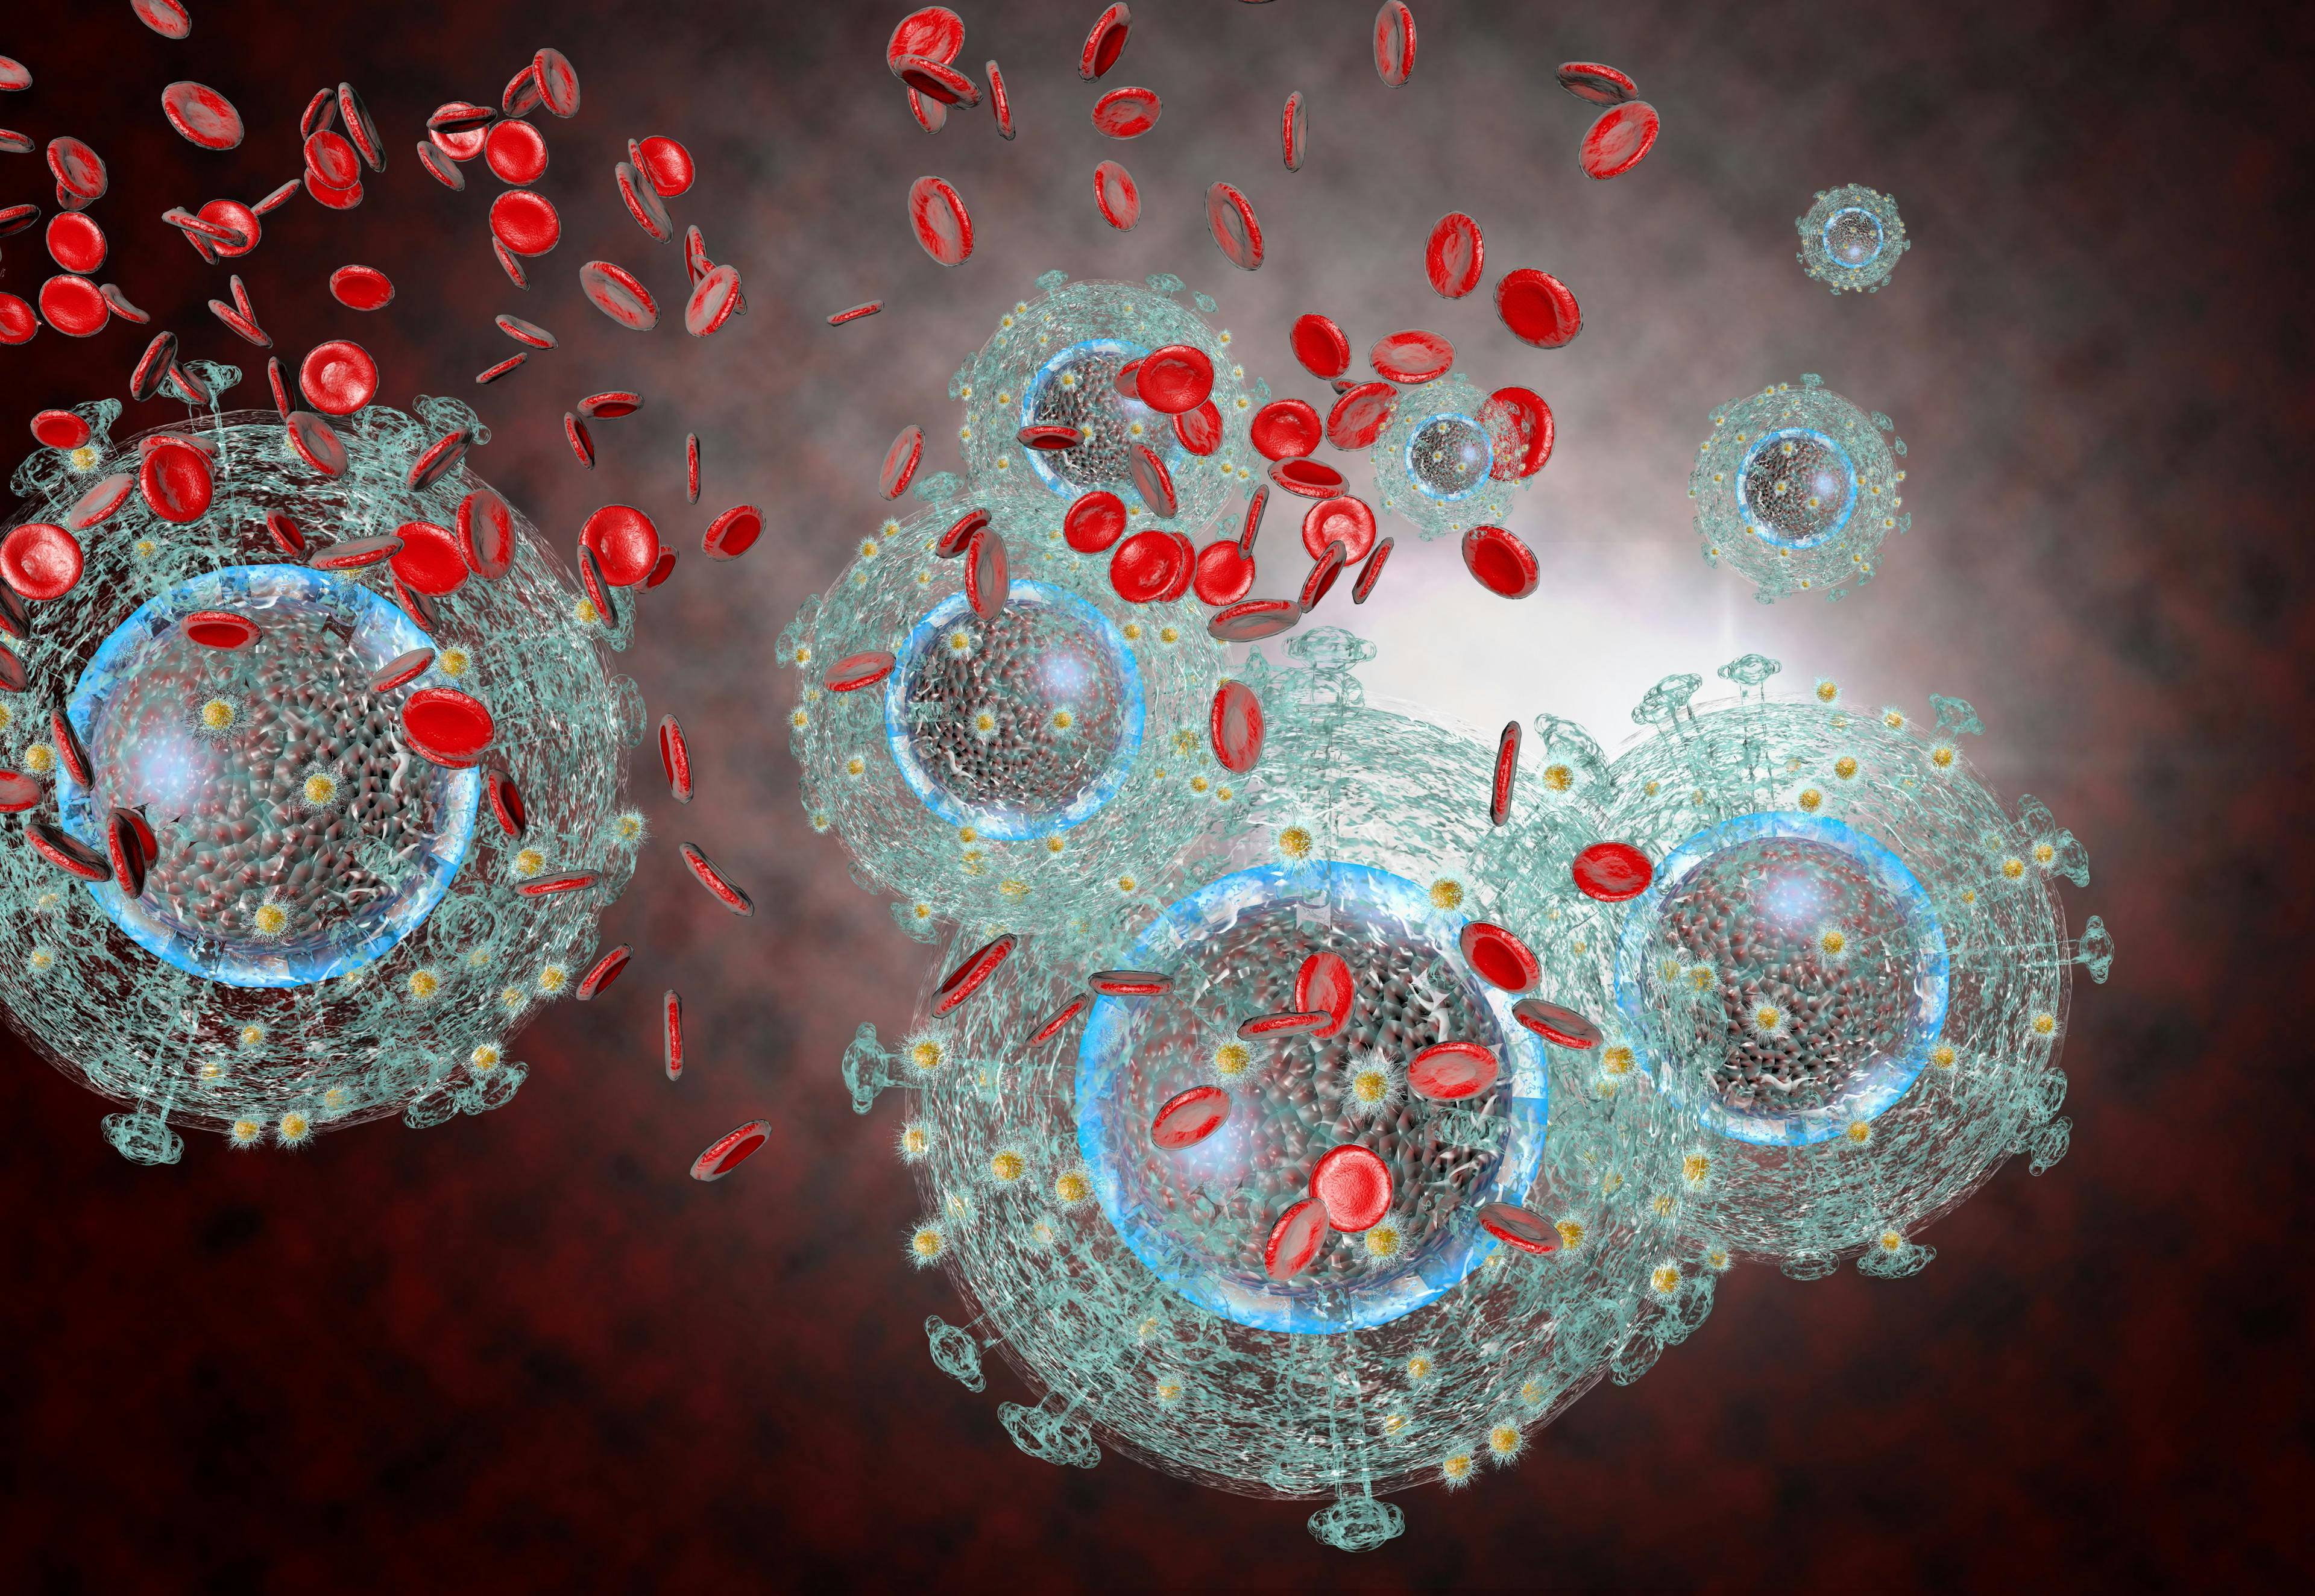 The HIV-AIDS virus visualized.